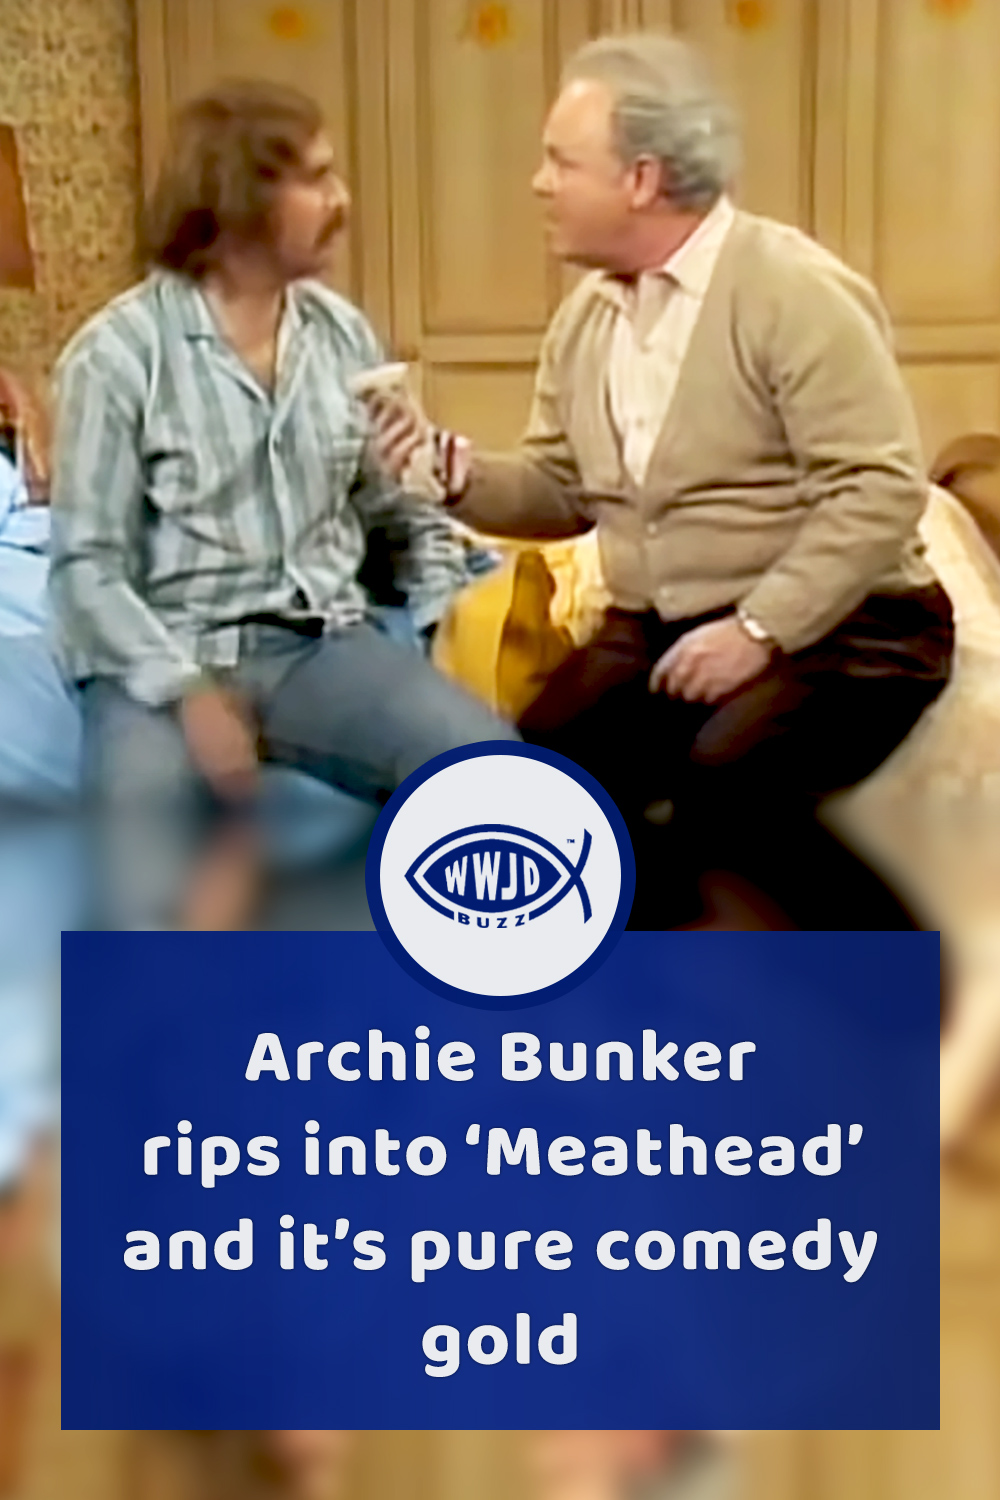 Archie Bunker rips into ‘Meathead’ and it’s pure comedy gold